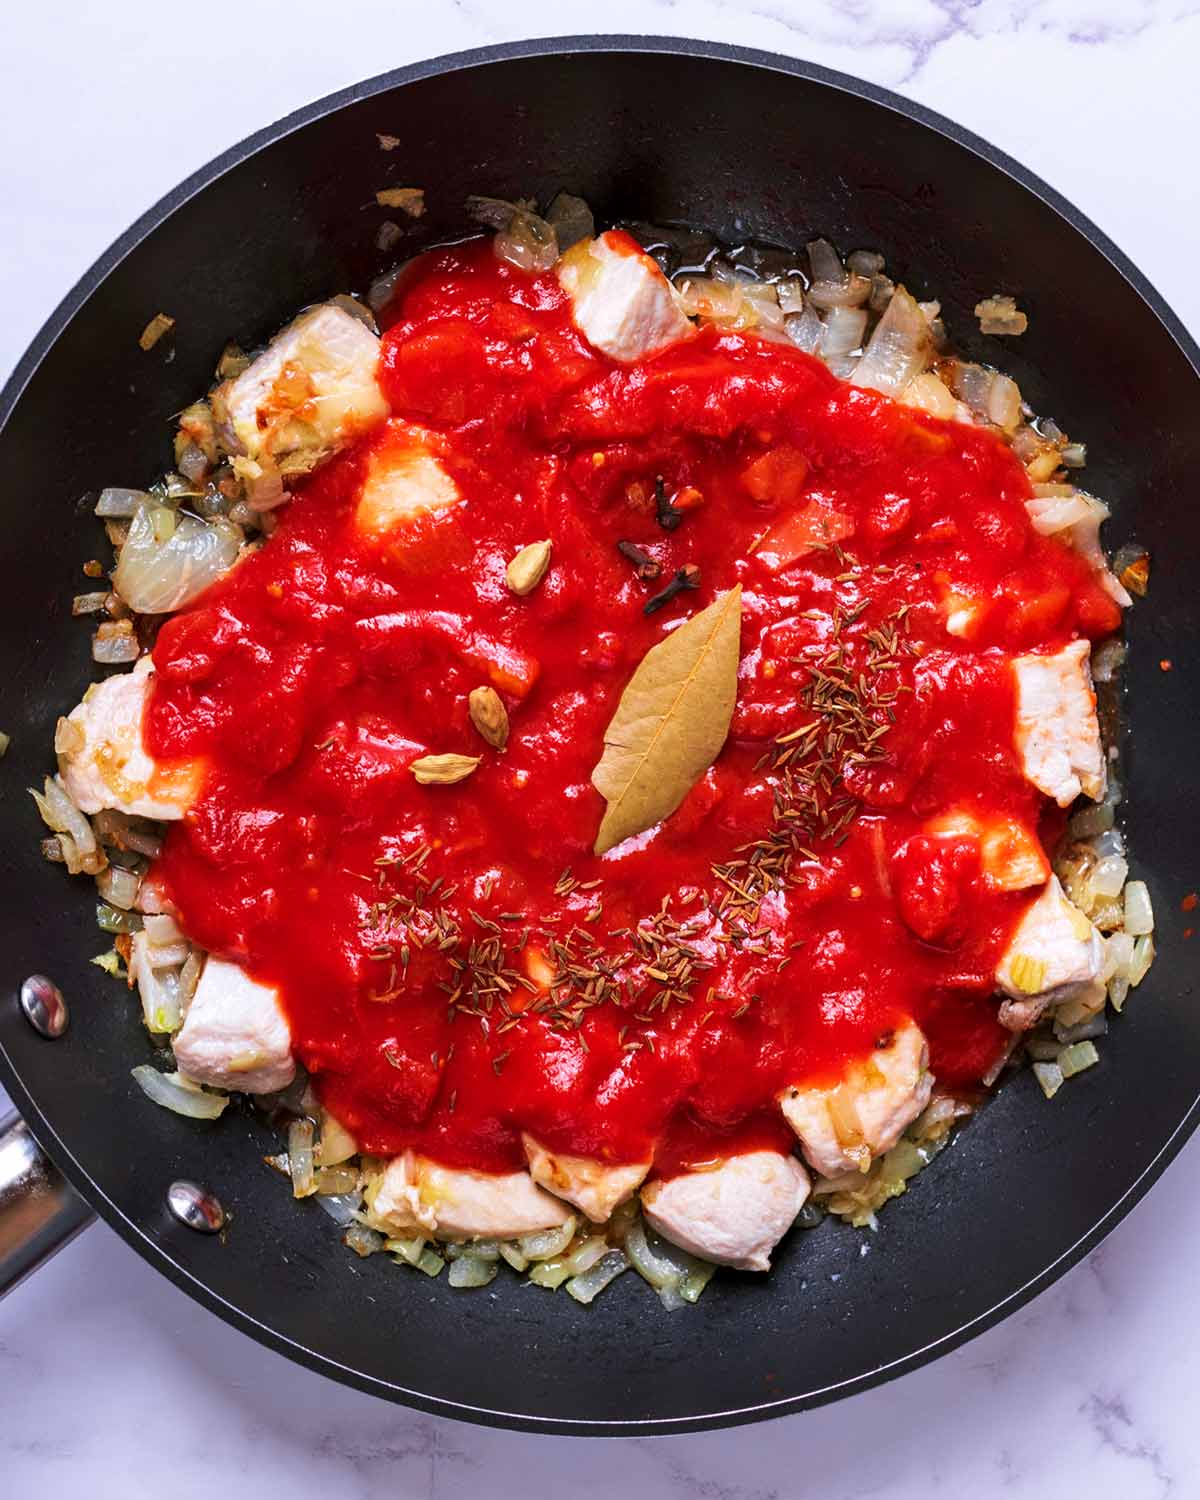 Chicken, onion, tomatoes and spices cooking in a frying pan.